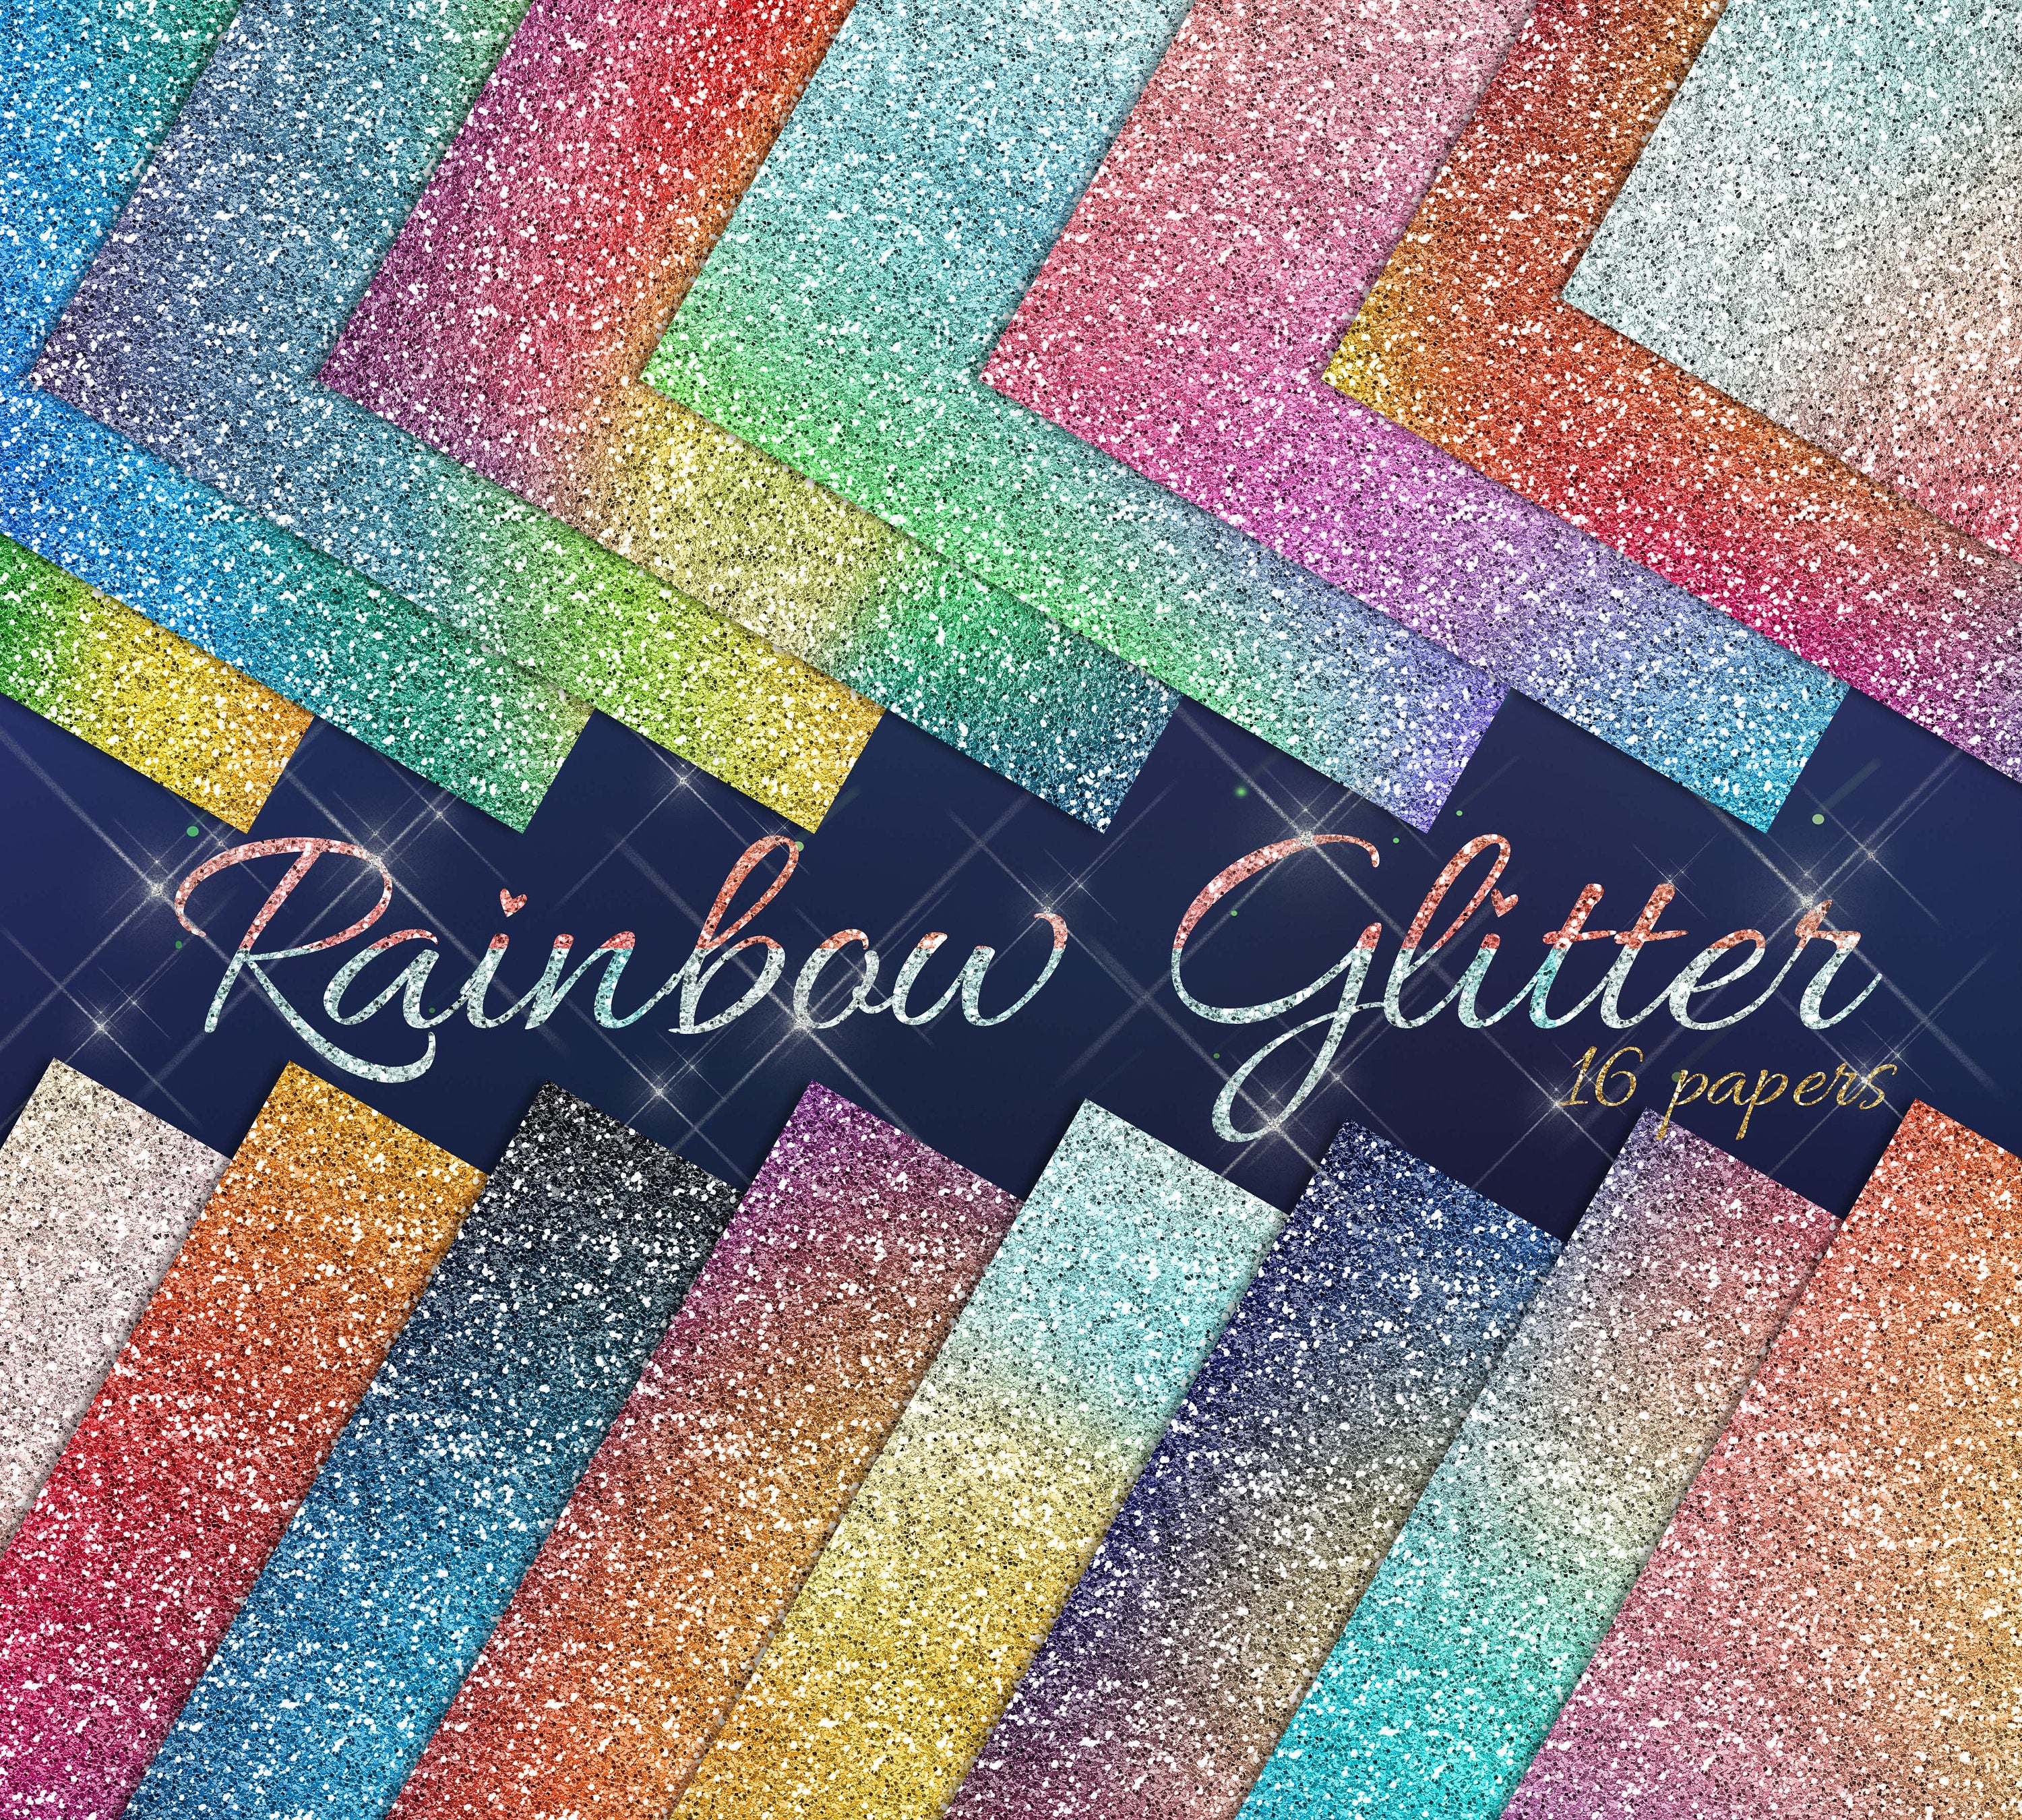 16 Glitter Rainbow Papers, 12 inch, 300 Dpi, Instant Download, Commercial Use Papers, JPG Paper, Glitter Paper, Digital Paper Pack, Rainbow